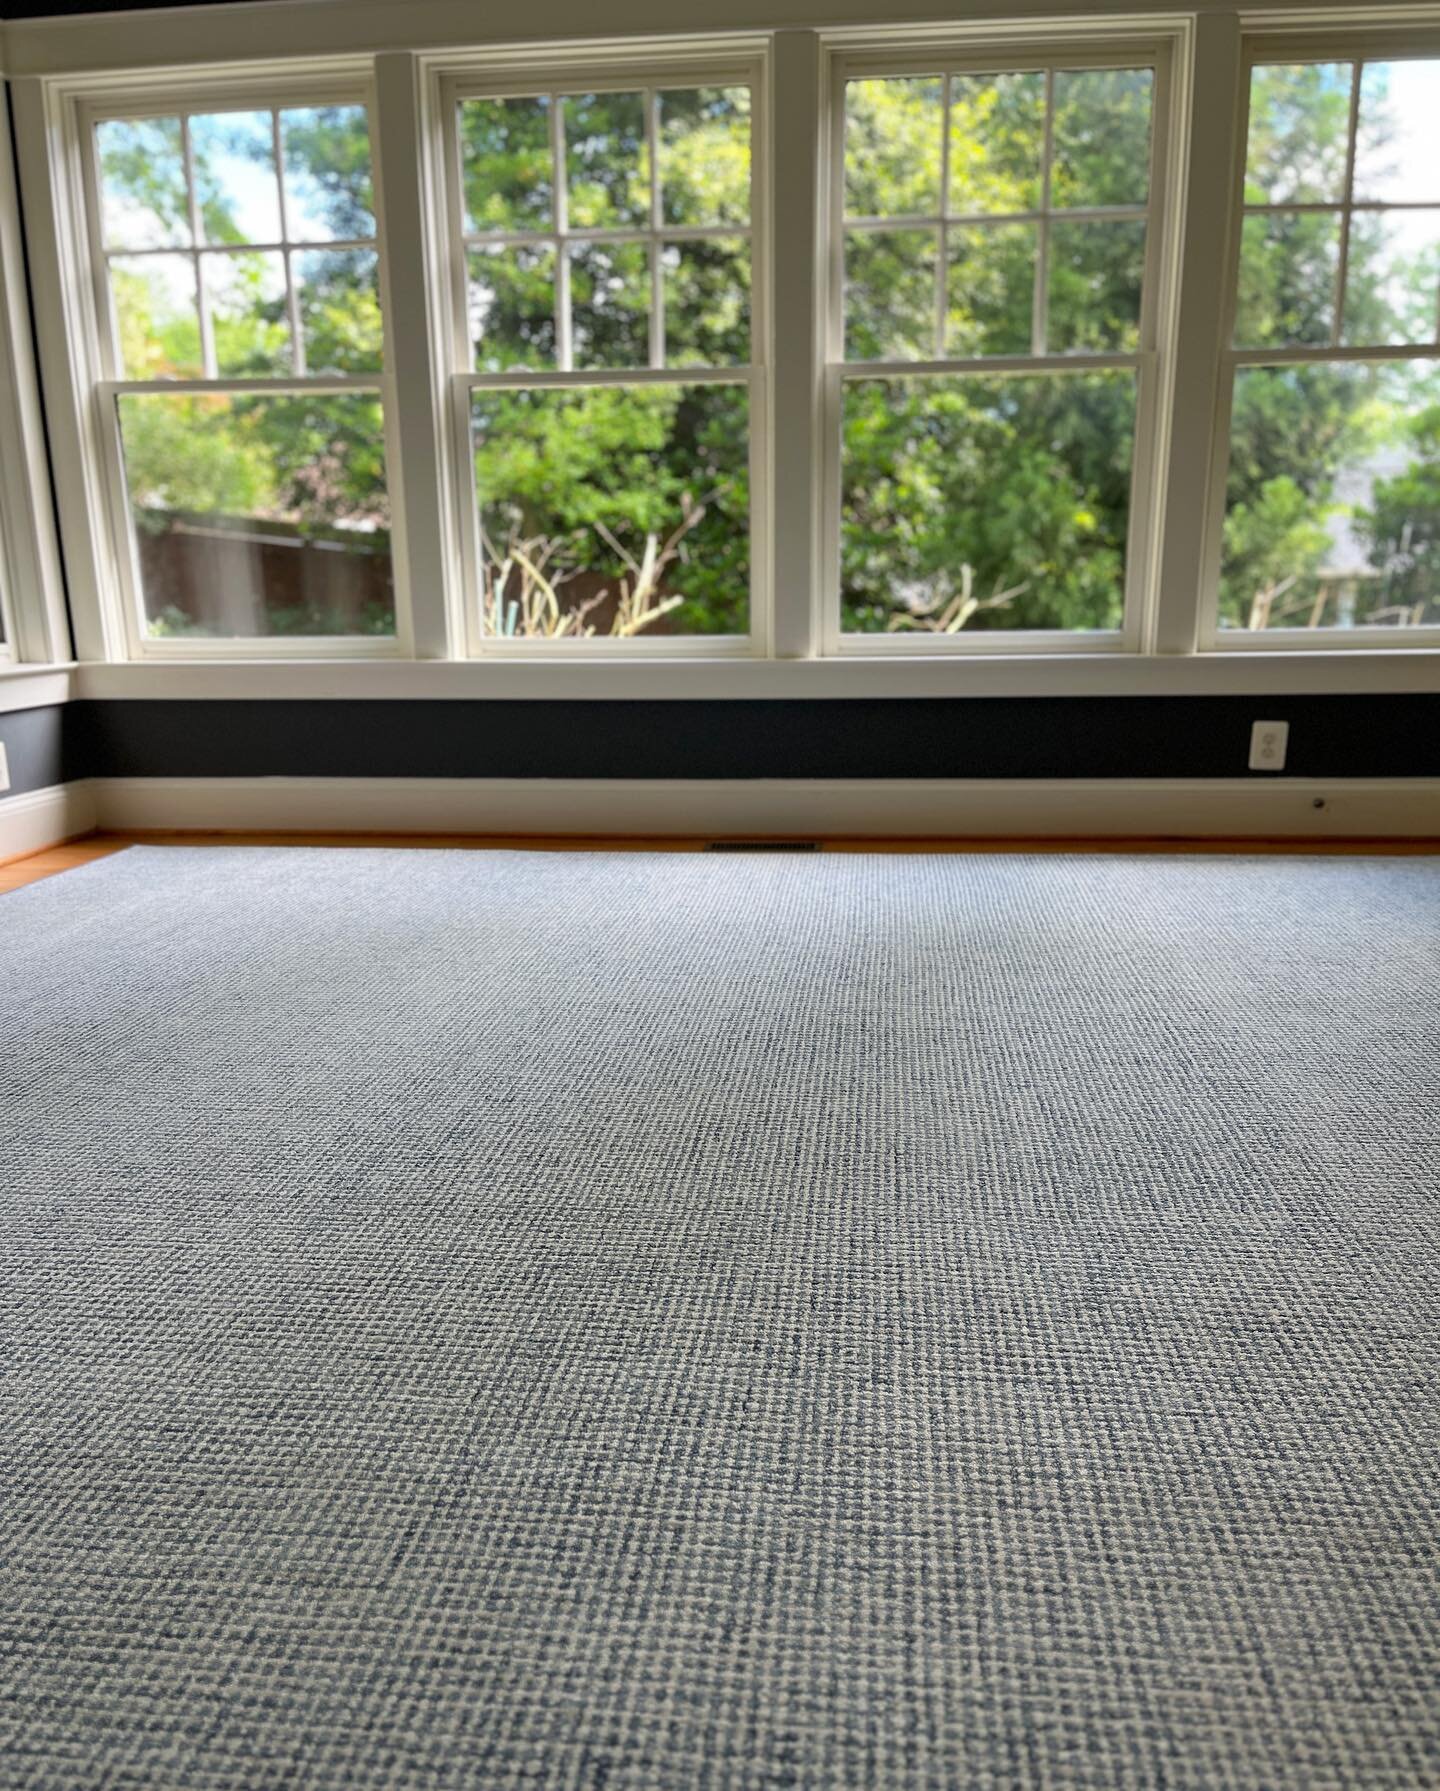 Rug install today! Clients are always thrilled with a custom cut rug that fits their space- it truly transforms a room and lays the foundation for all the other pieces! 
.
.
.
#interiordesign #interiordecorating #interiordesigner #customrugs #floorco